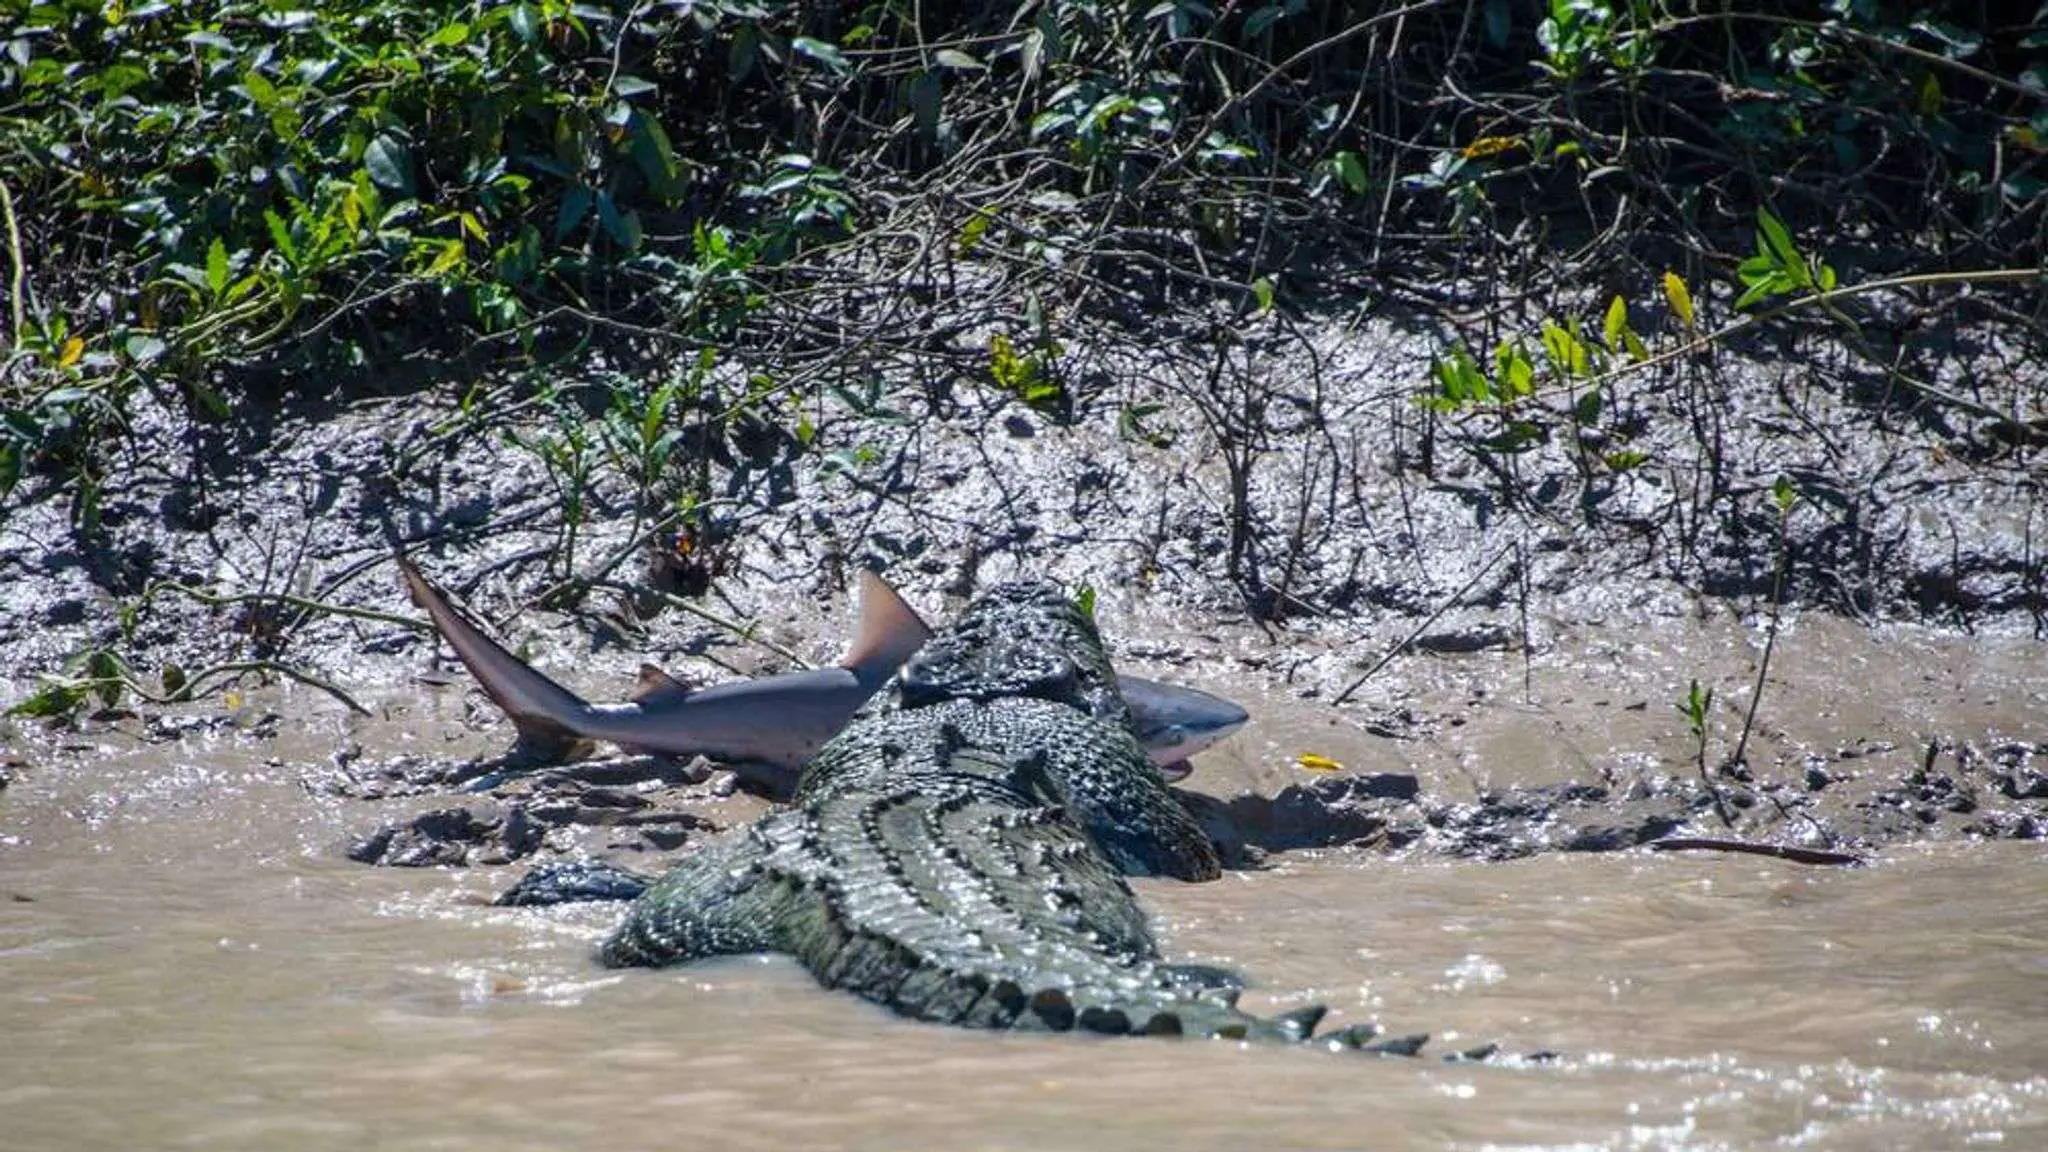 Giant Crocodiles Become Local Celebrities in Beautiful Adelaide River